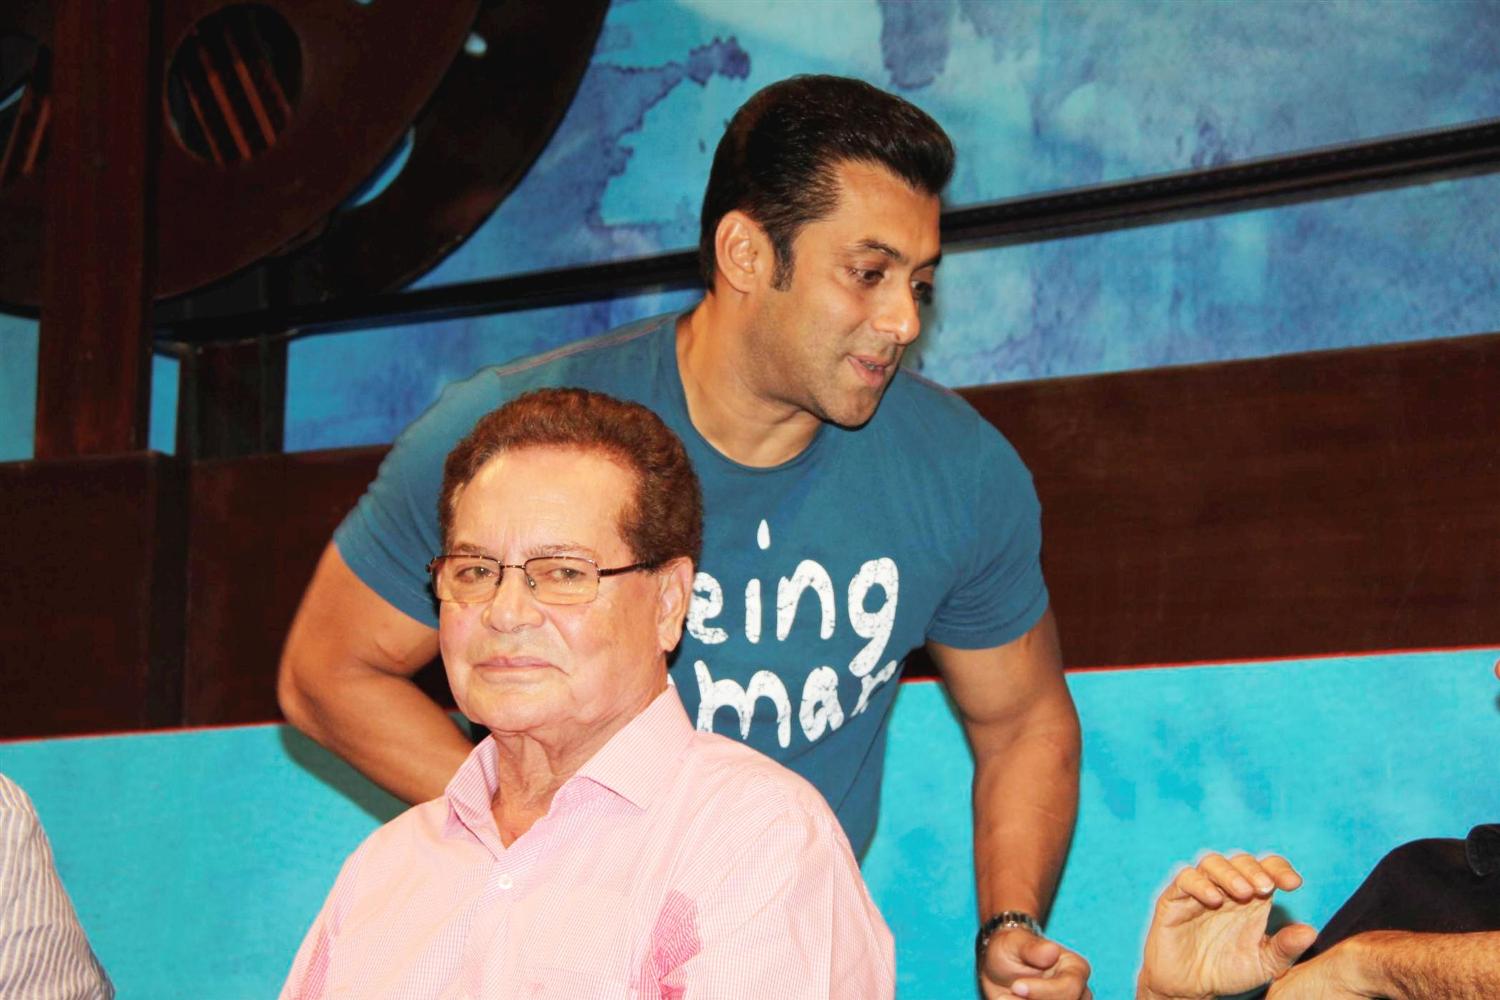 Salman Khan with his father